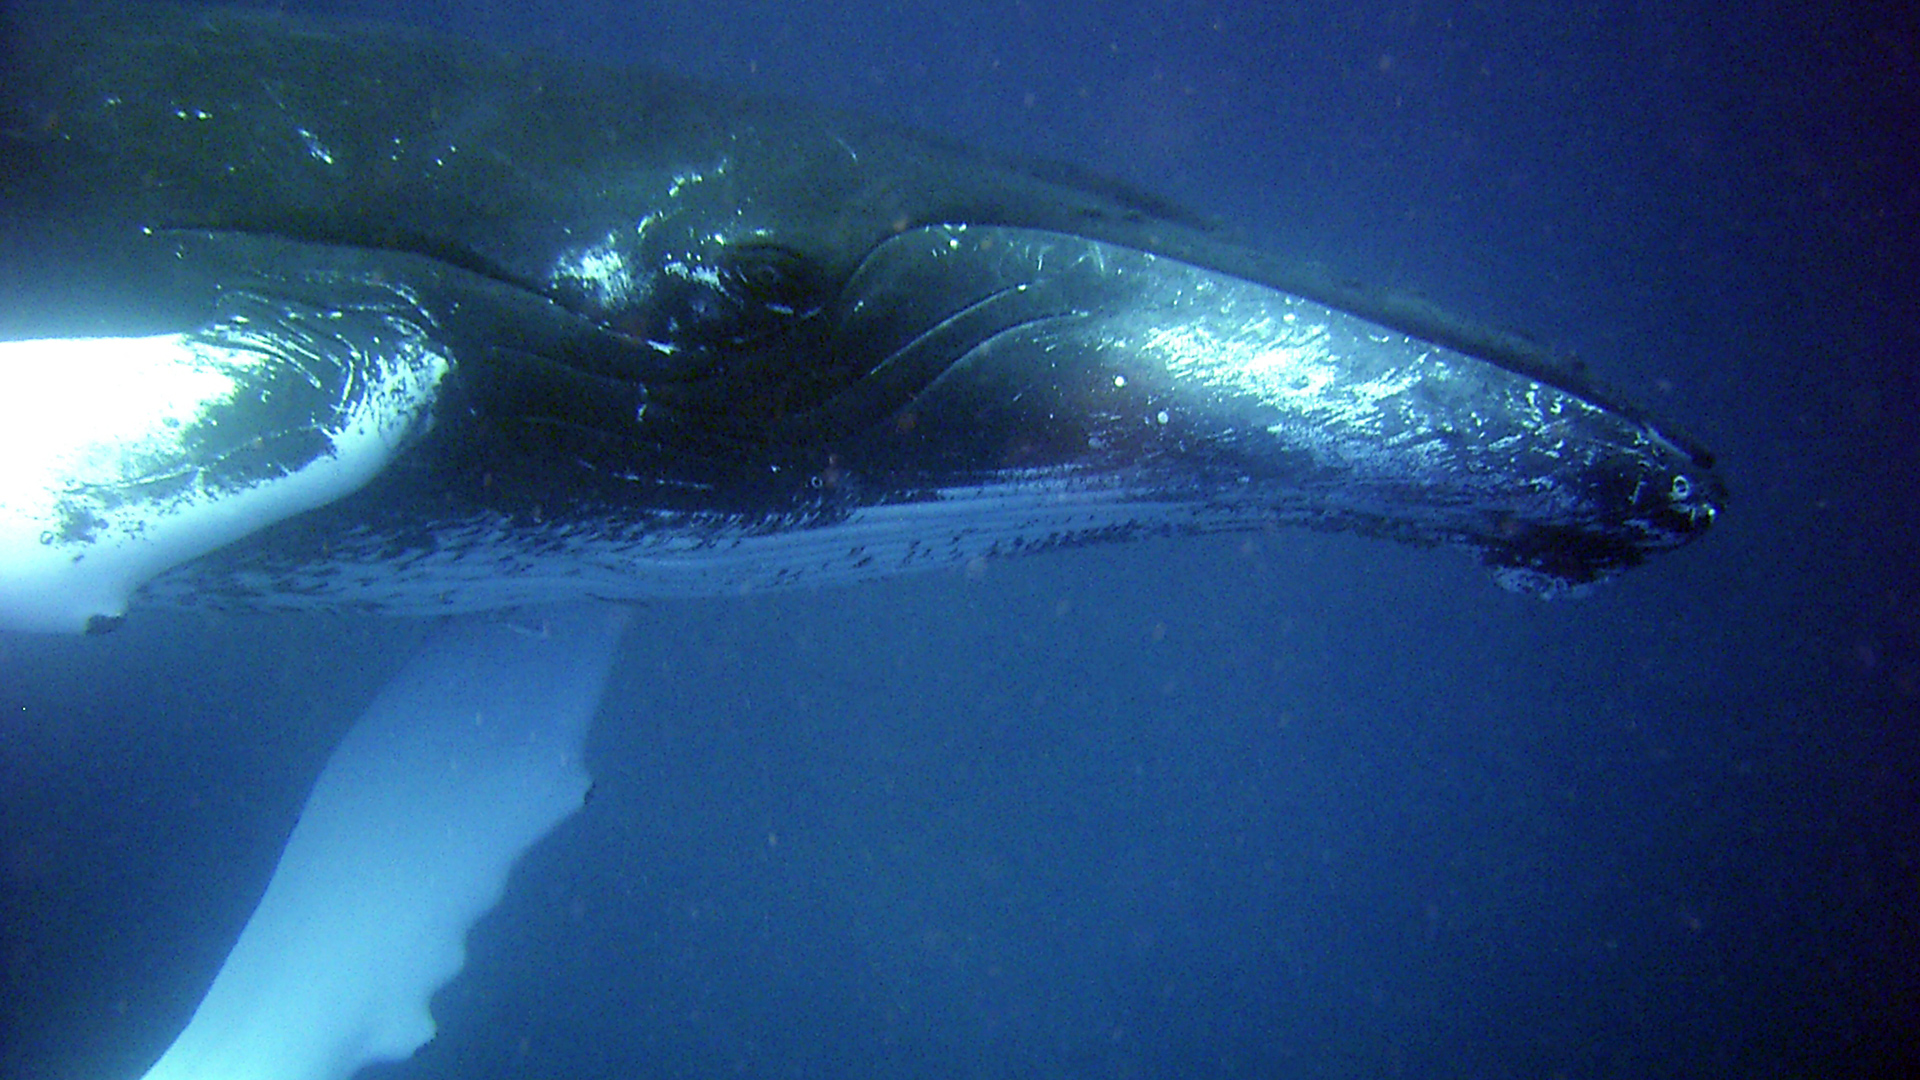 Underwater view of a humpback whale from its head to its pectoral fins.